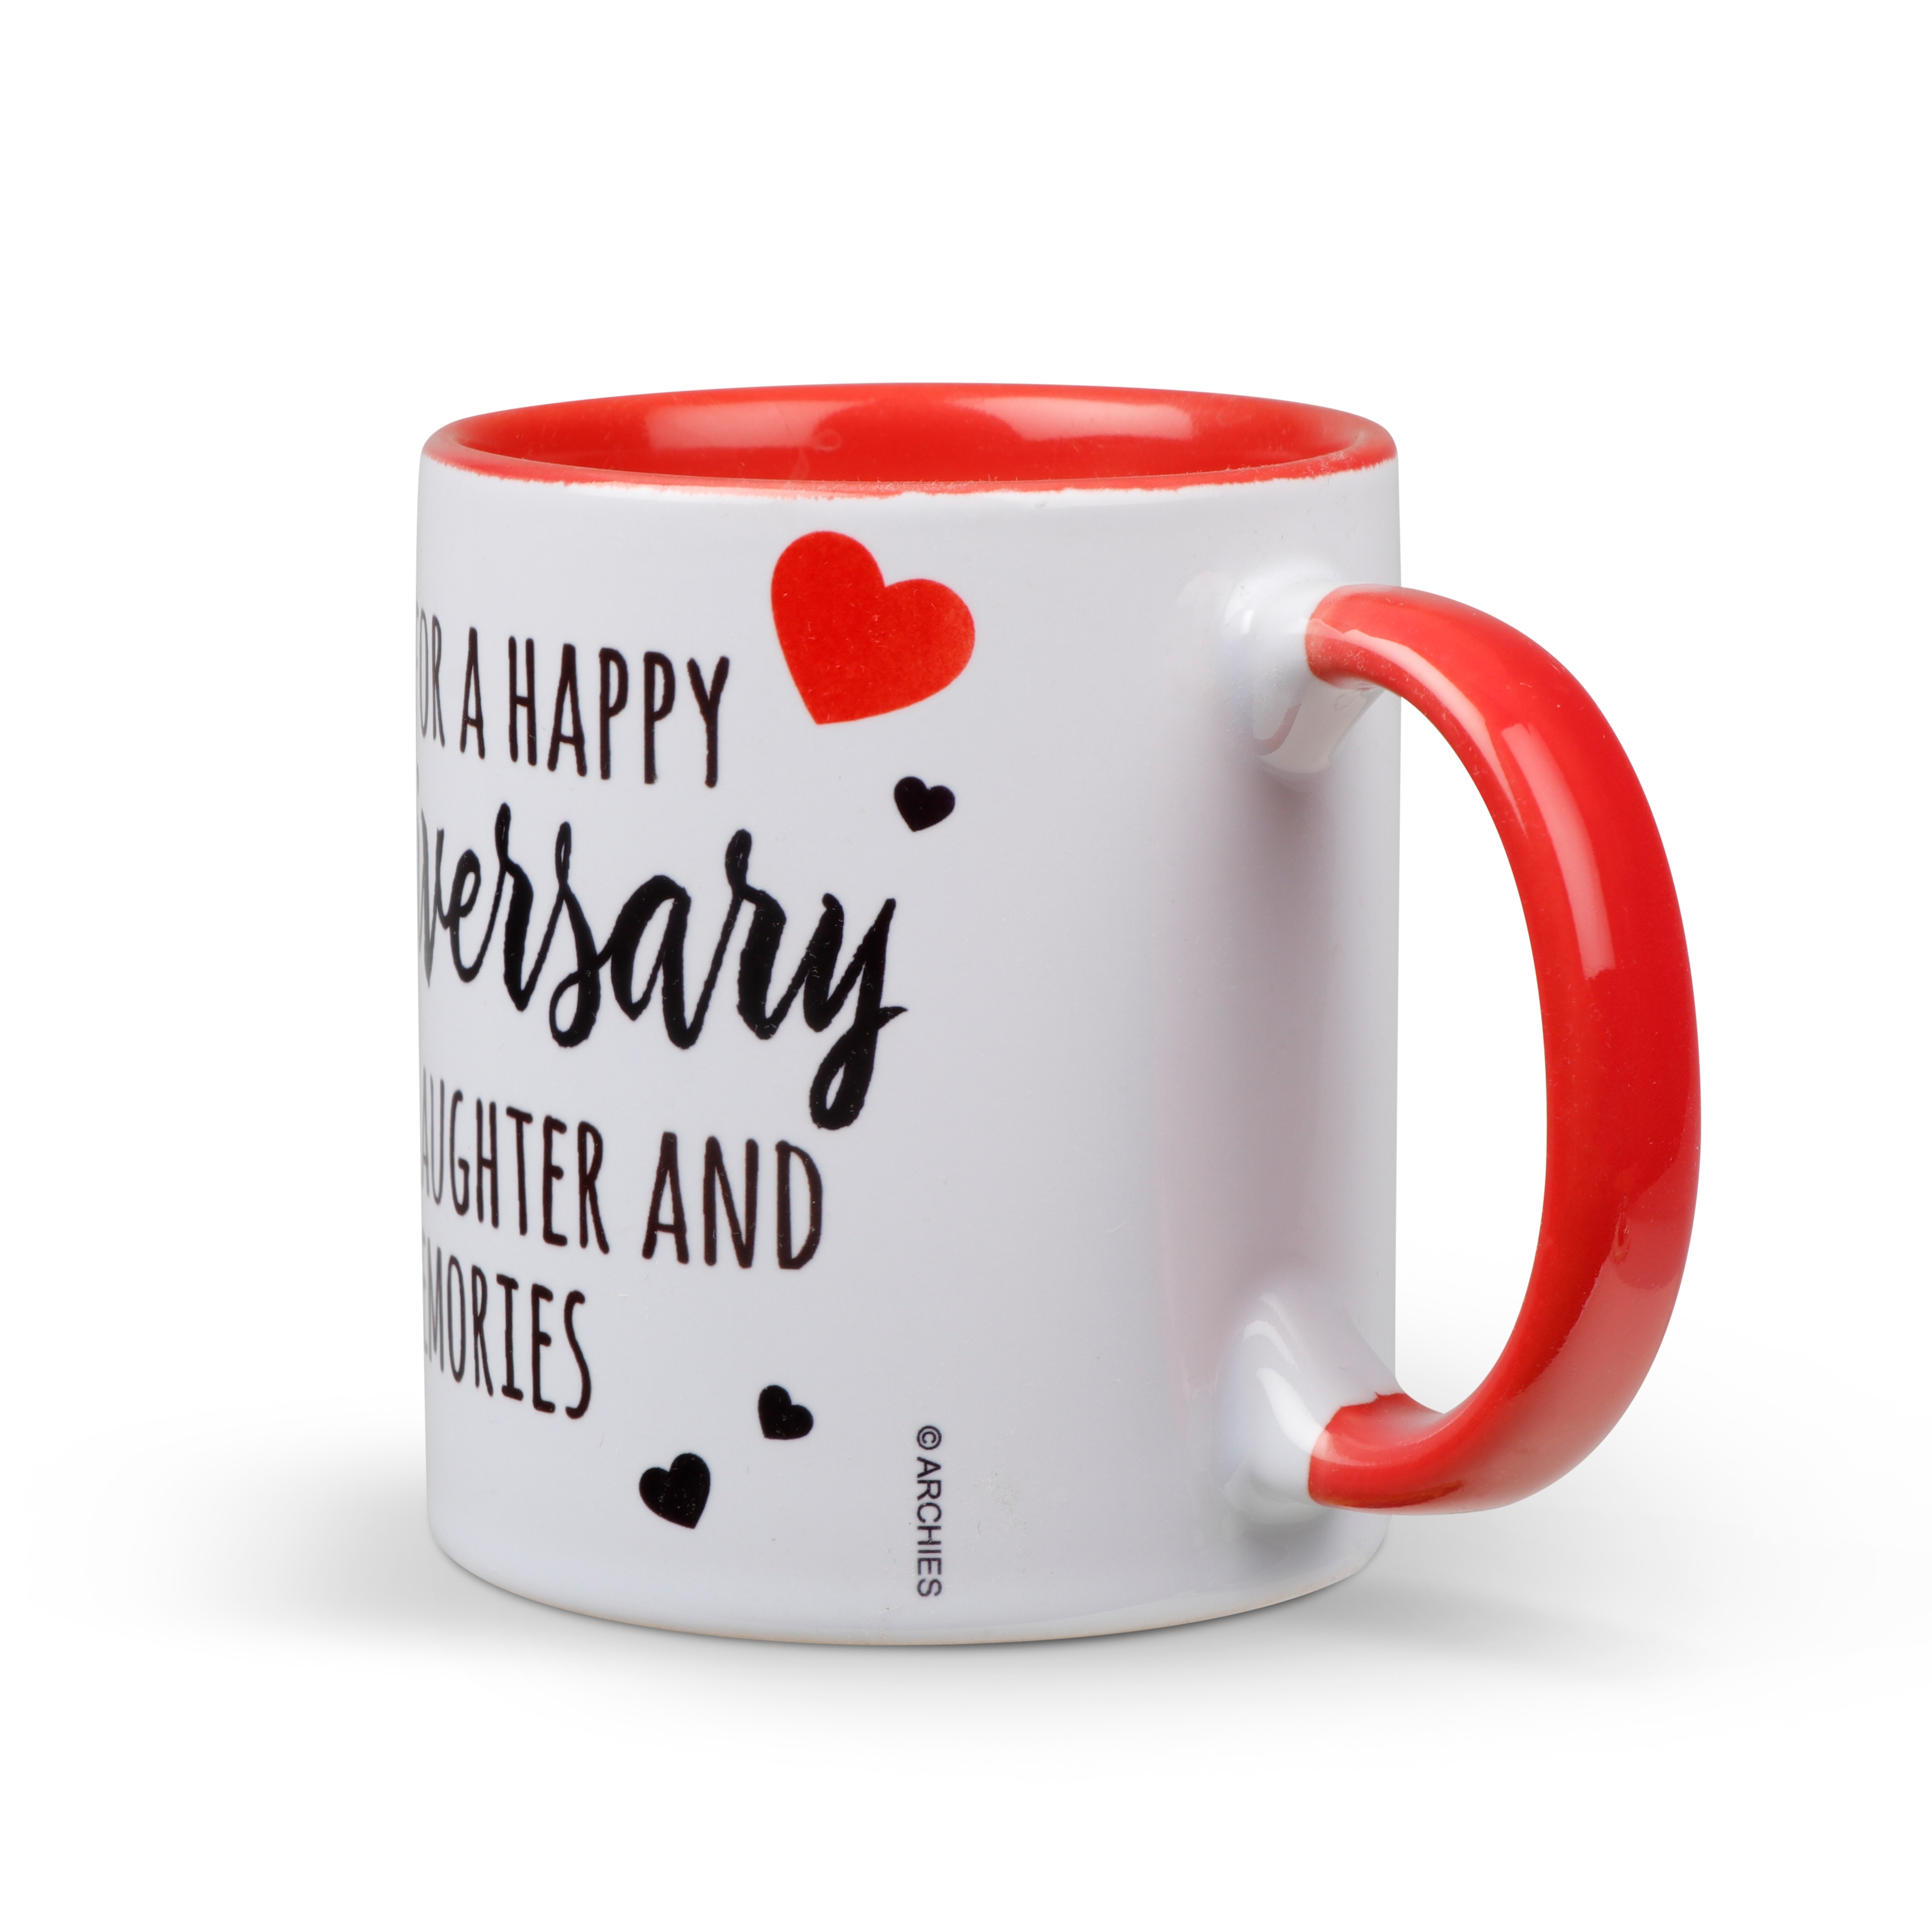 Archies | Archies KEEPSAKE MUG - A-IS FOR MY ANNIVERSIRY LOVE LAUGHTER AND MEMORIES Mug Coffee Cup White Printed Ceramic Gift  (12 x 11 x 9) (350 ml) 2